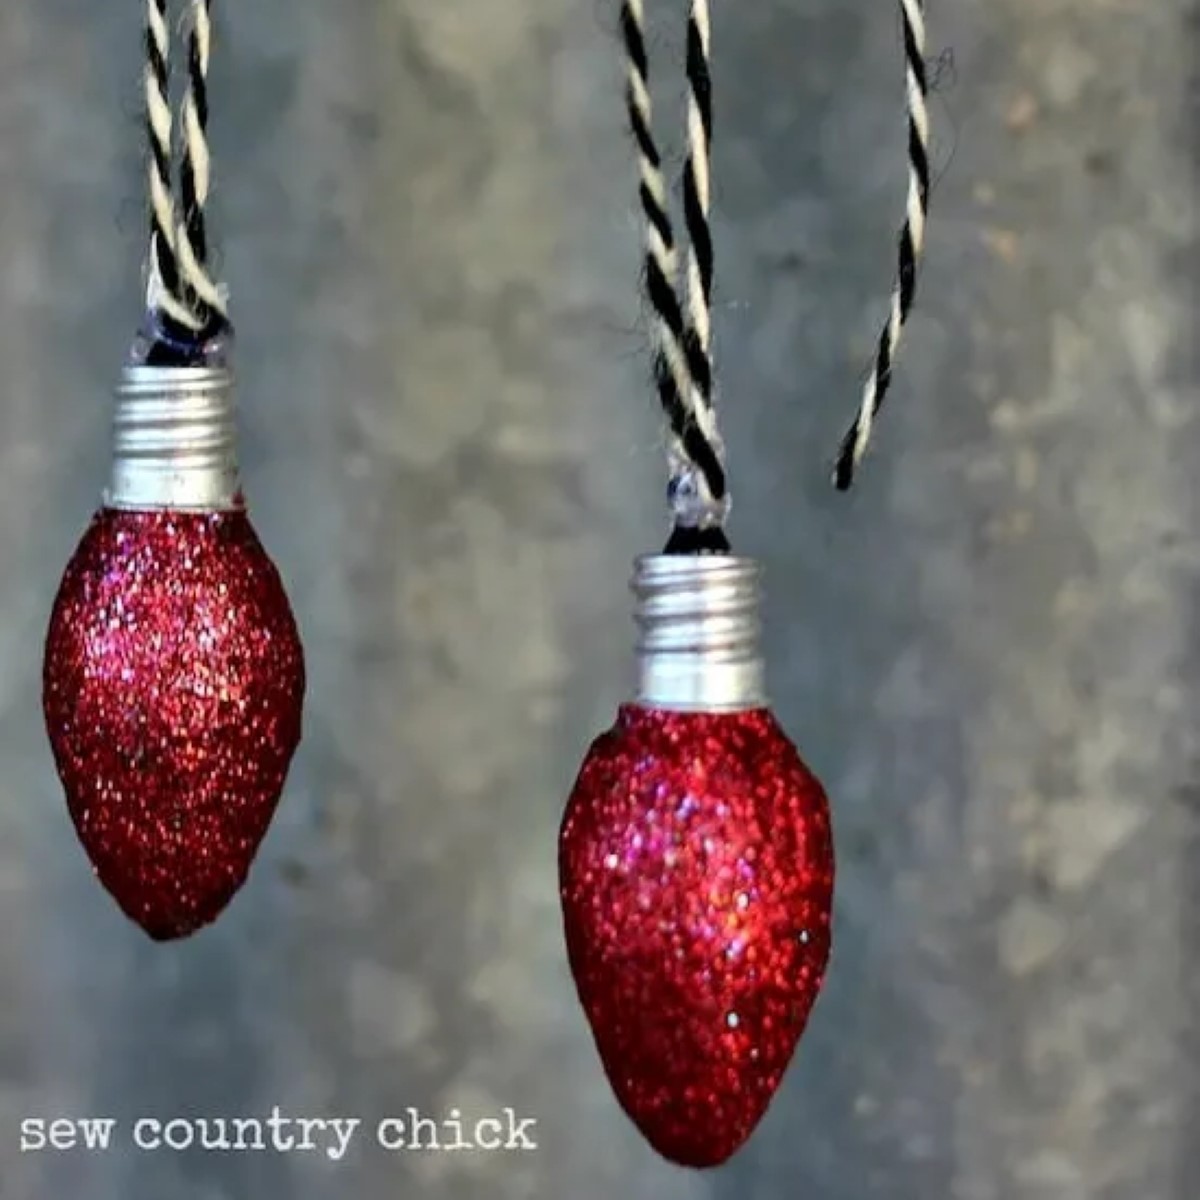 Small light bulb painted in red glitter